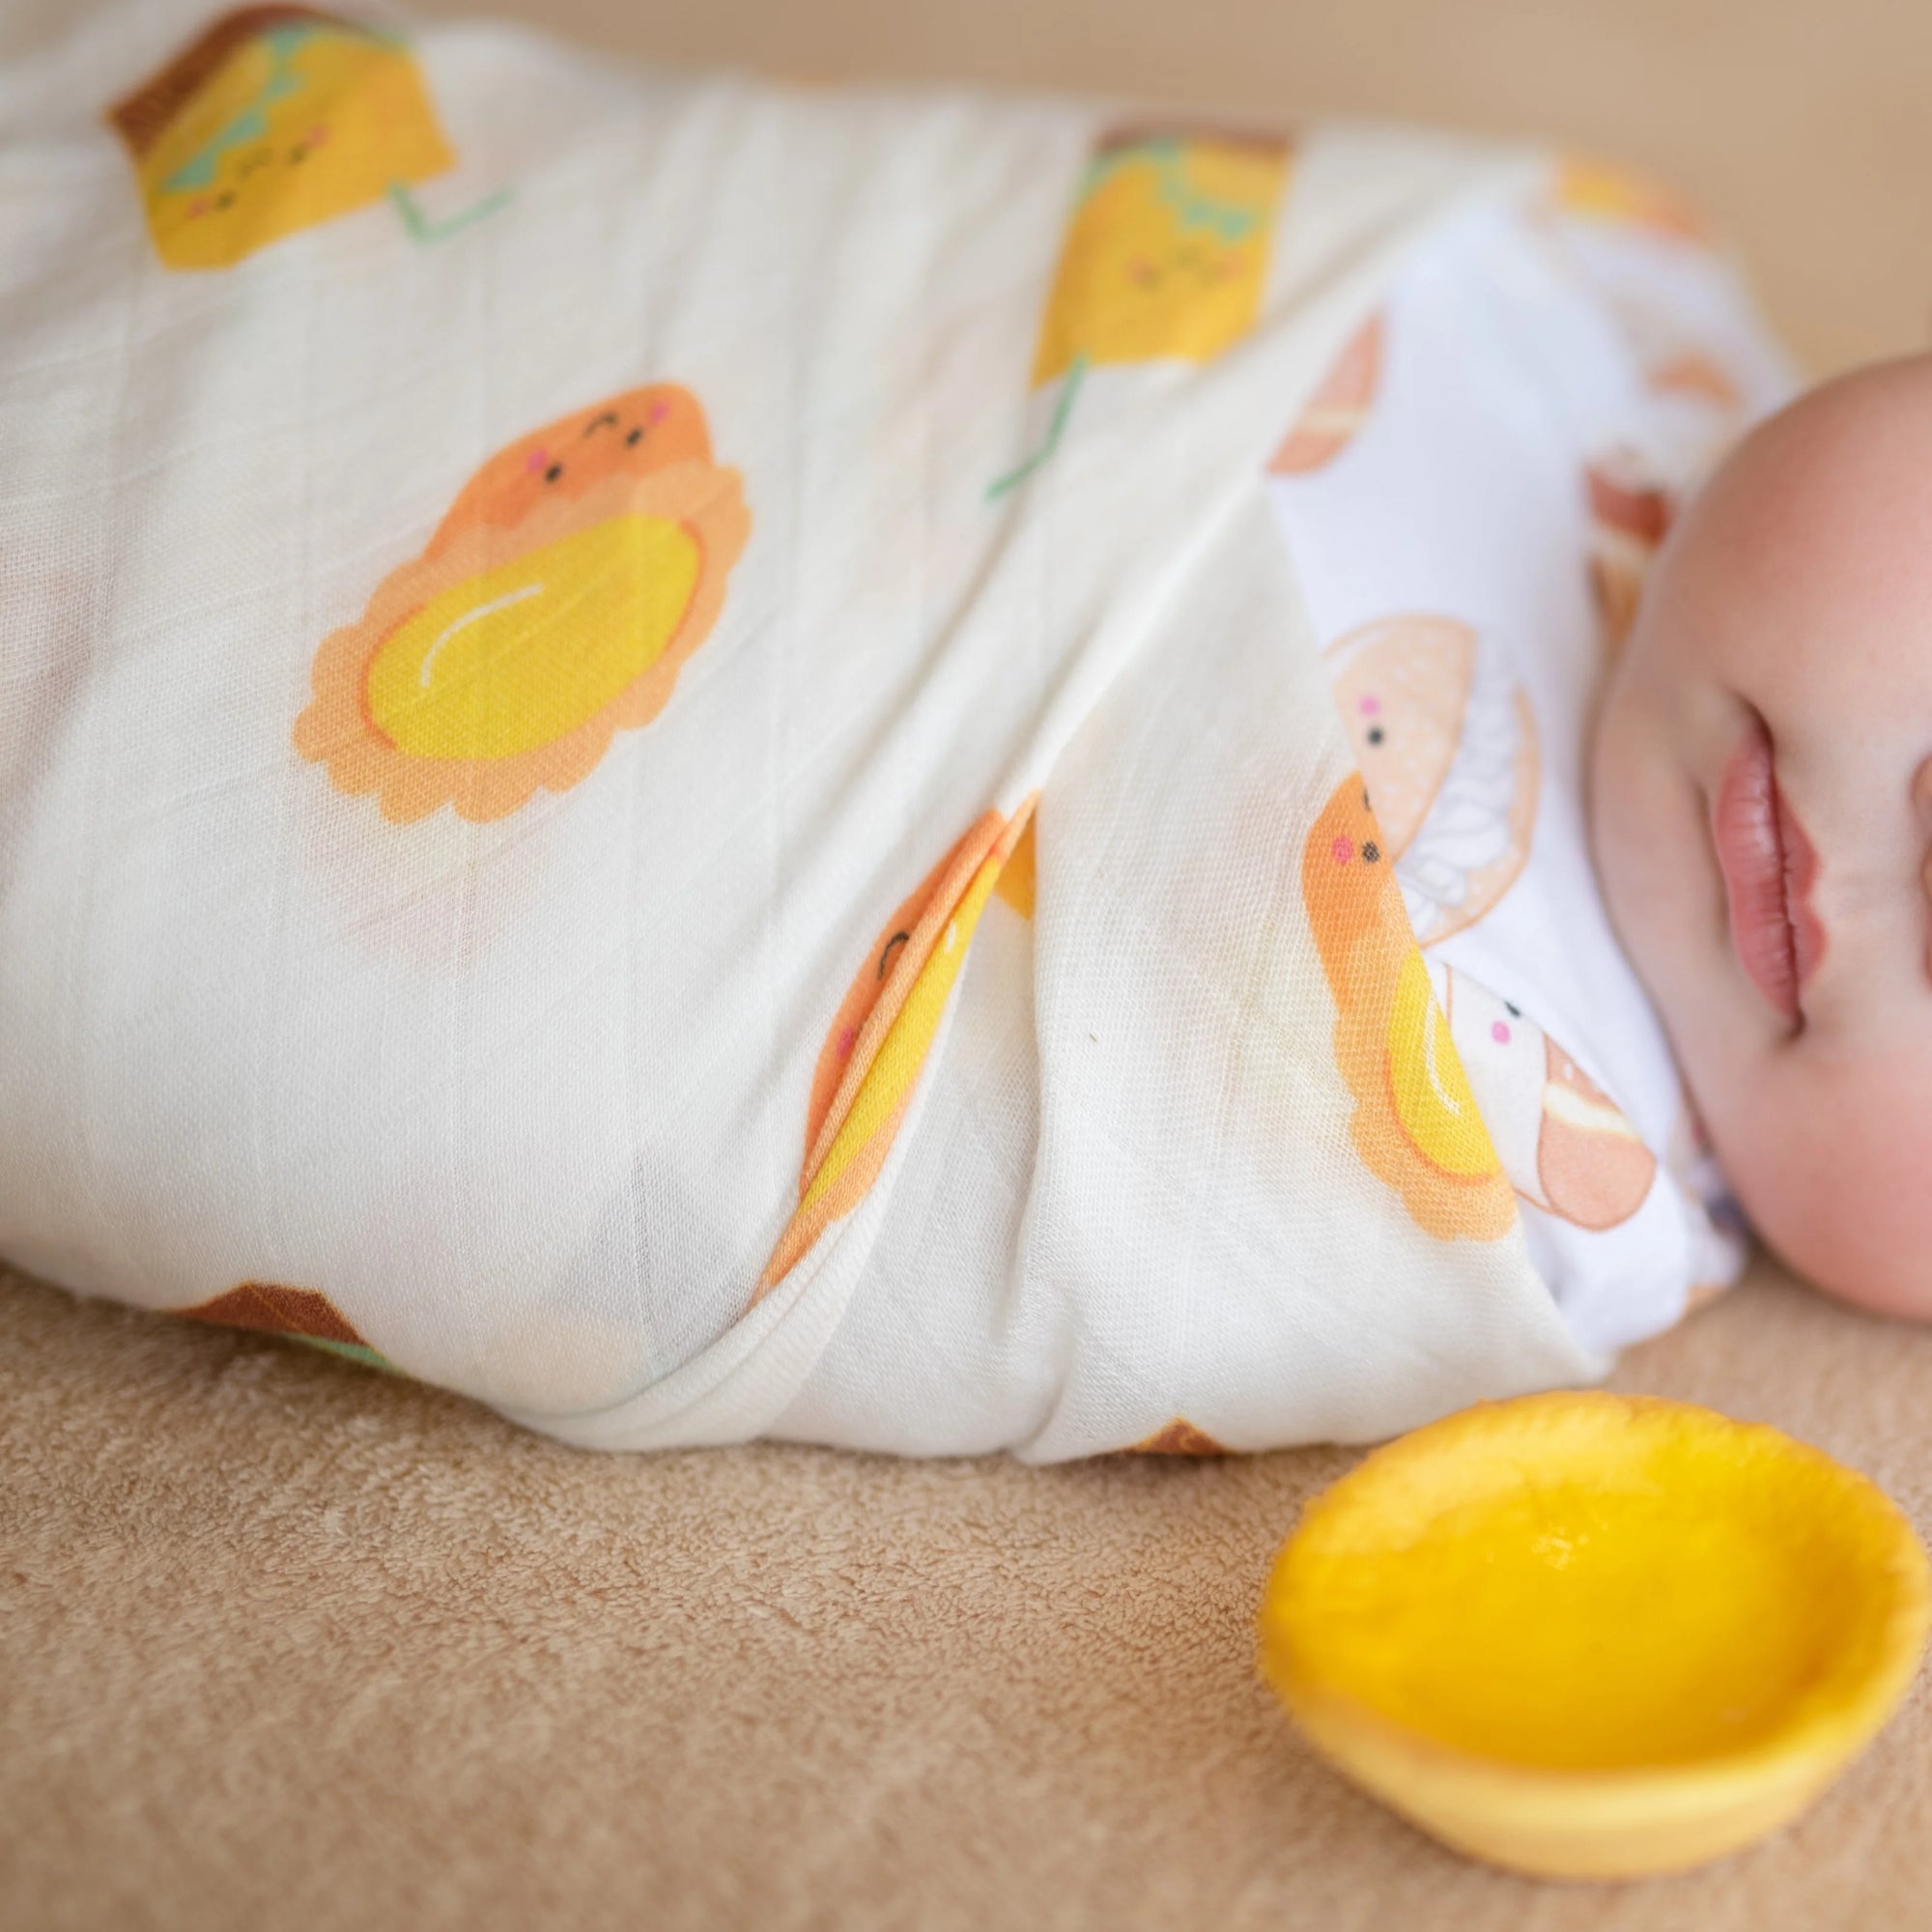 Our super soft organic swaddles are made from a unique mix of bamboo and organic cotton